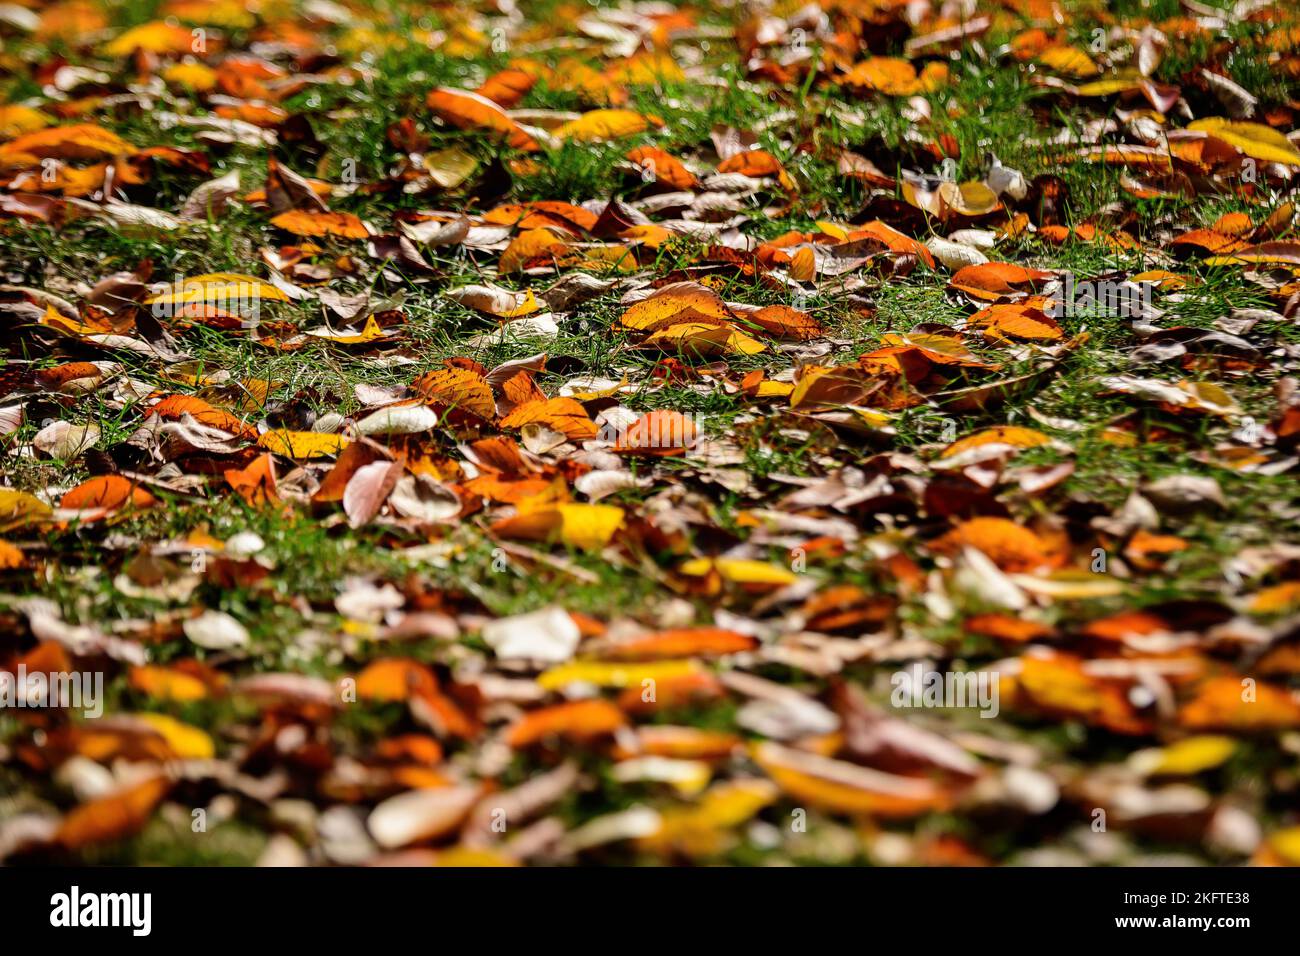 Minimalist monochrome background with many large red and orange leaves and small flowers on green grass in a park in a sunny autumn day Stock Photo